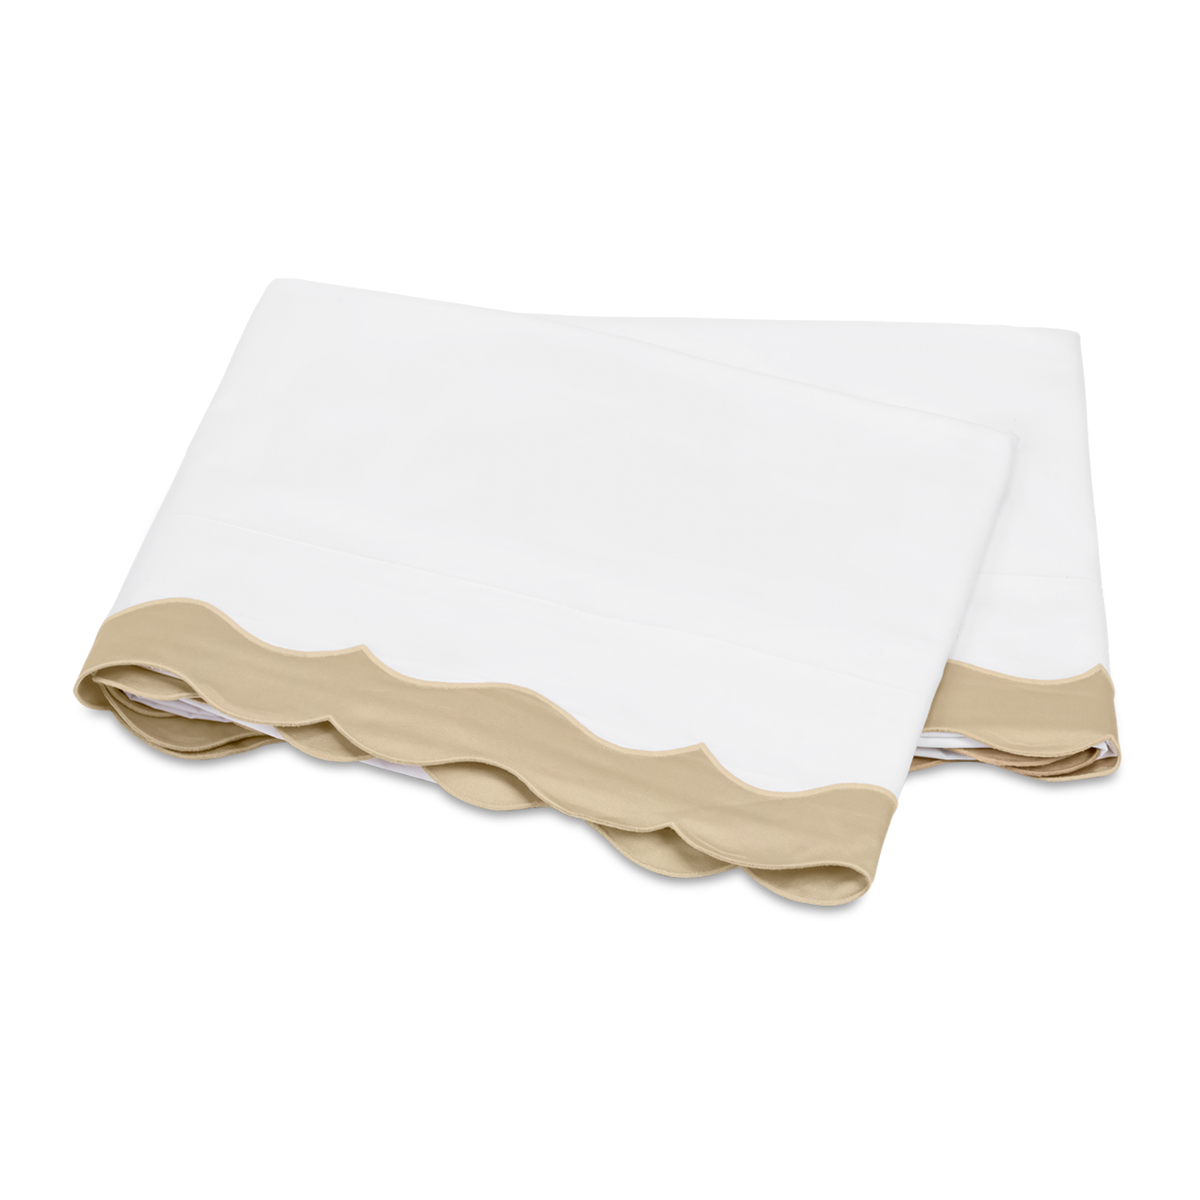 Folded Flat Sheet of Matouk Lorelei Bedding in Champagne Color